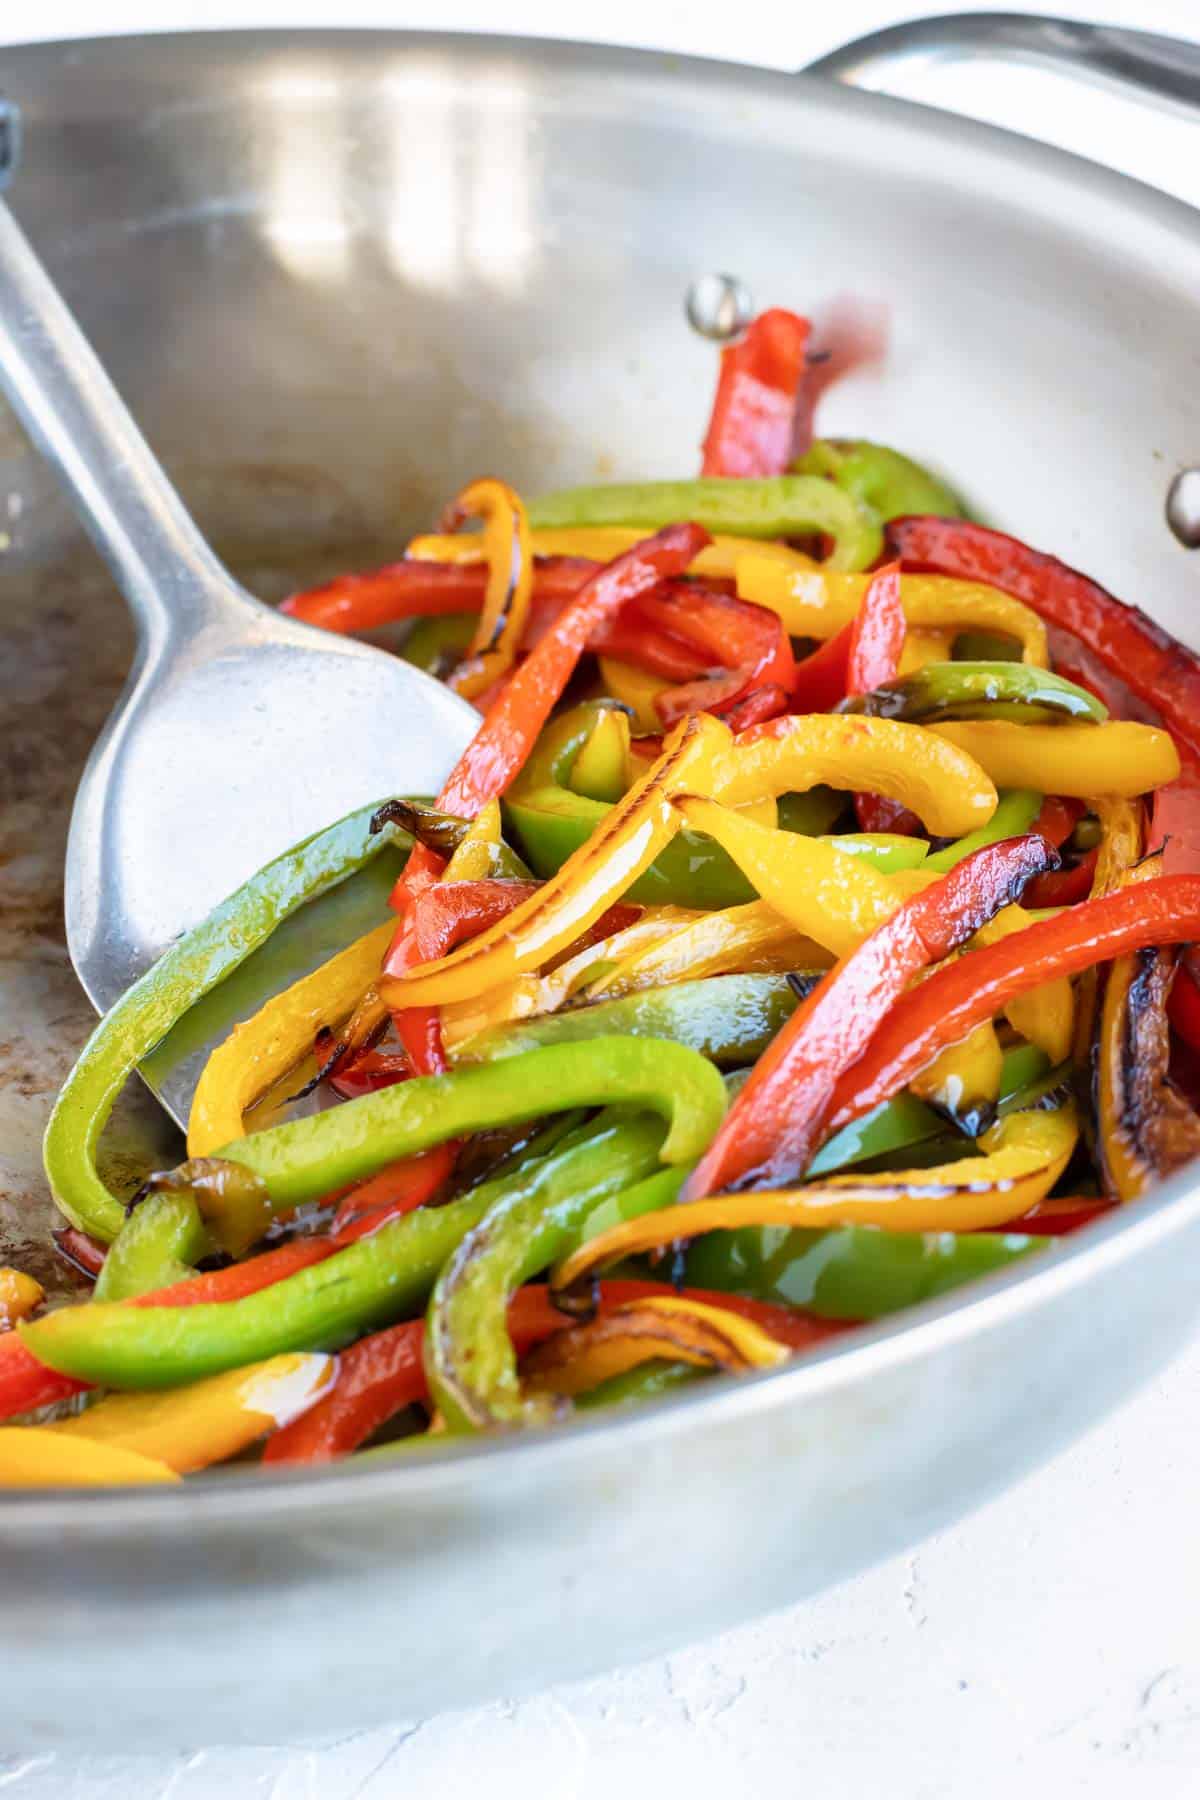 Sauteeing red, green, and yellow bell peppers in a stainless steel skillet.